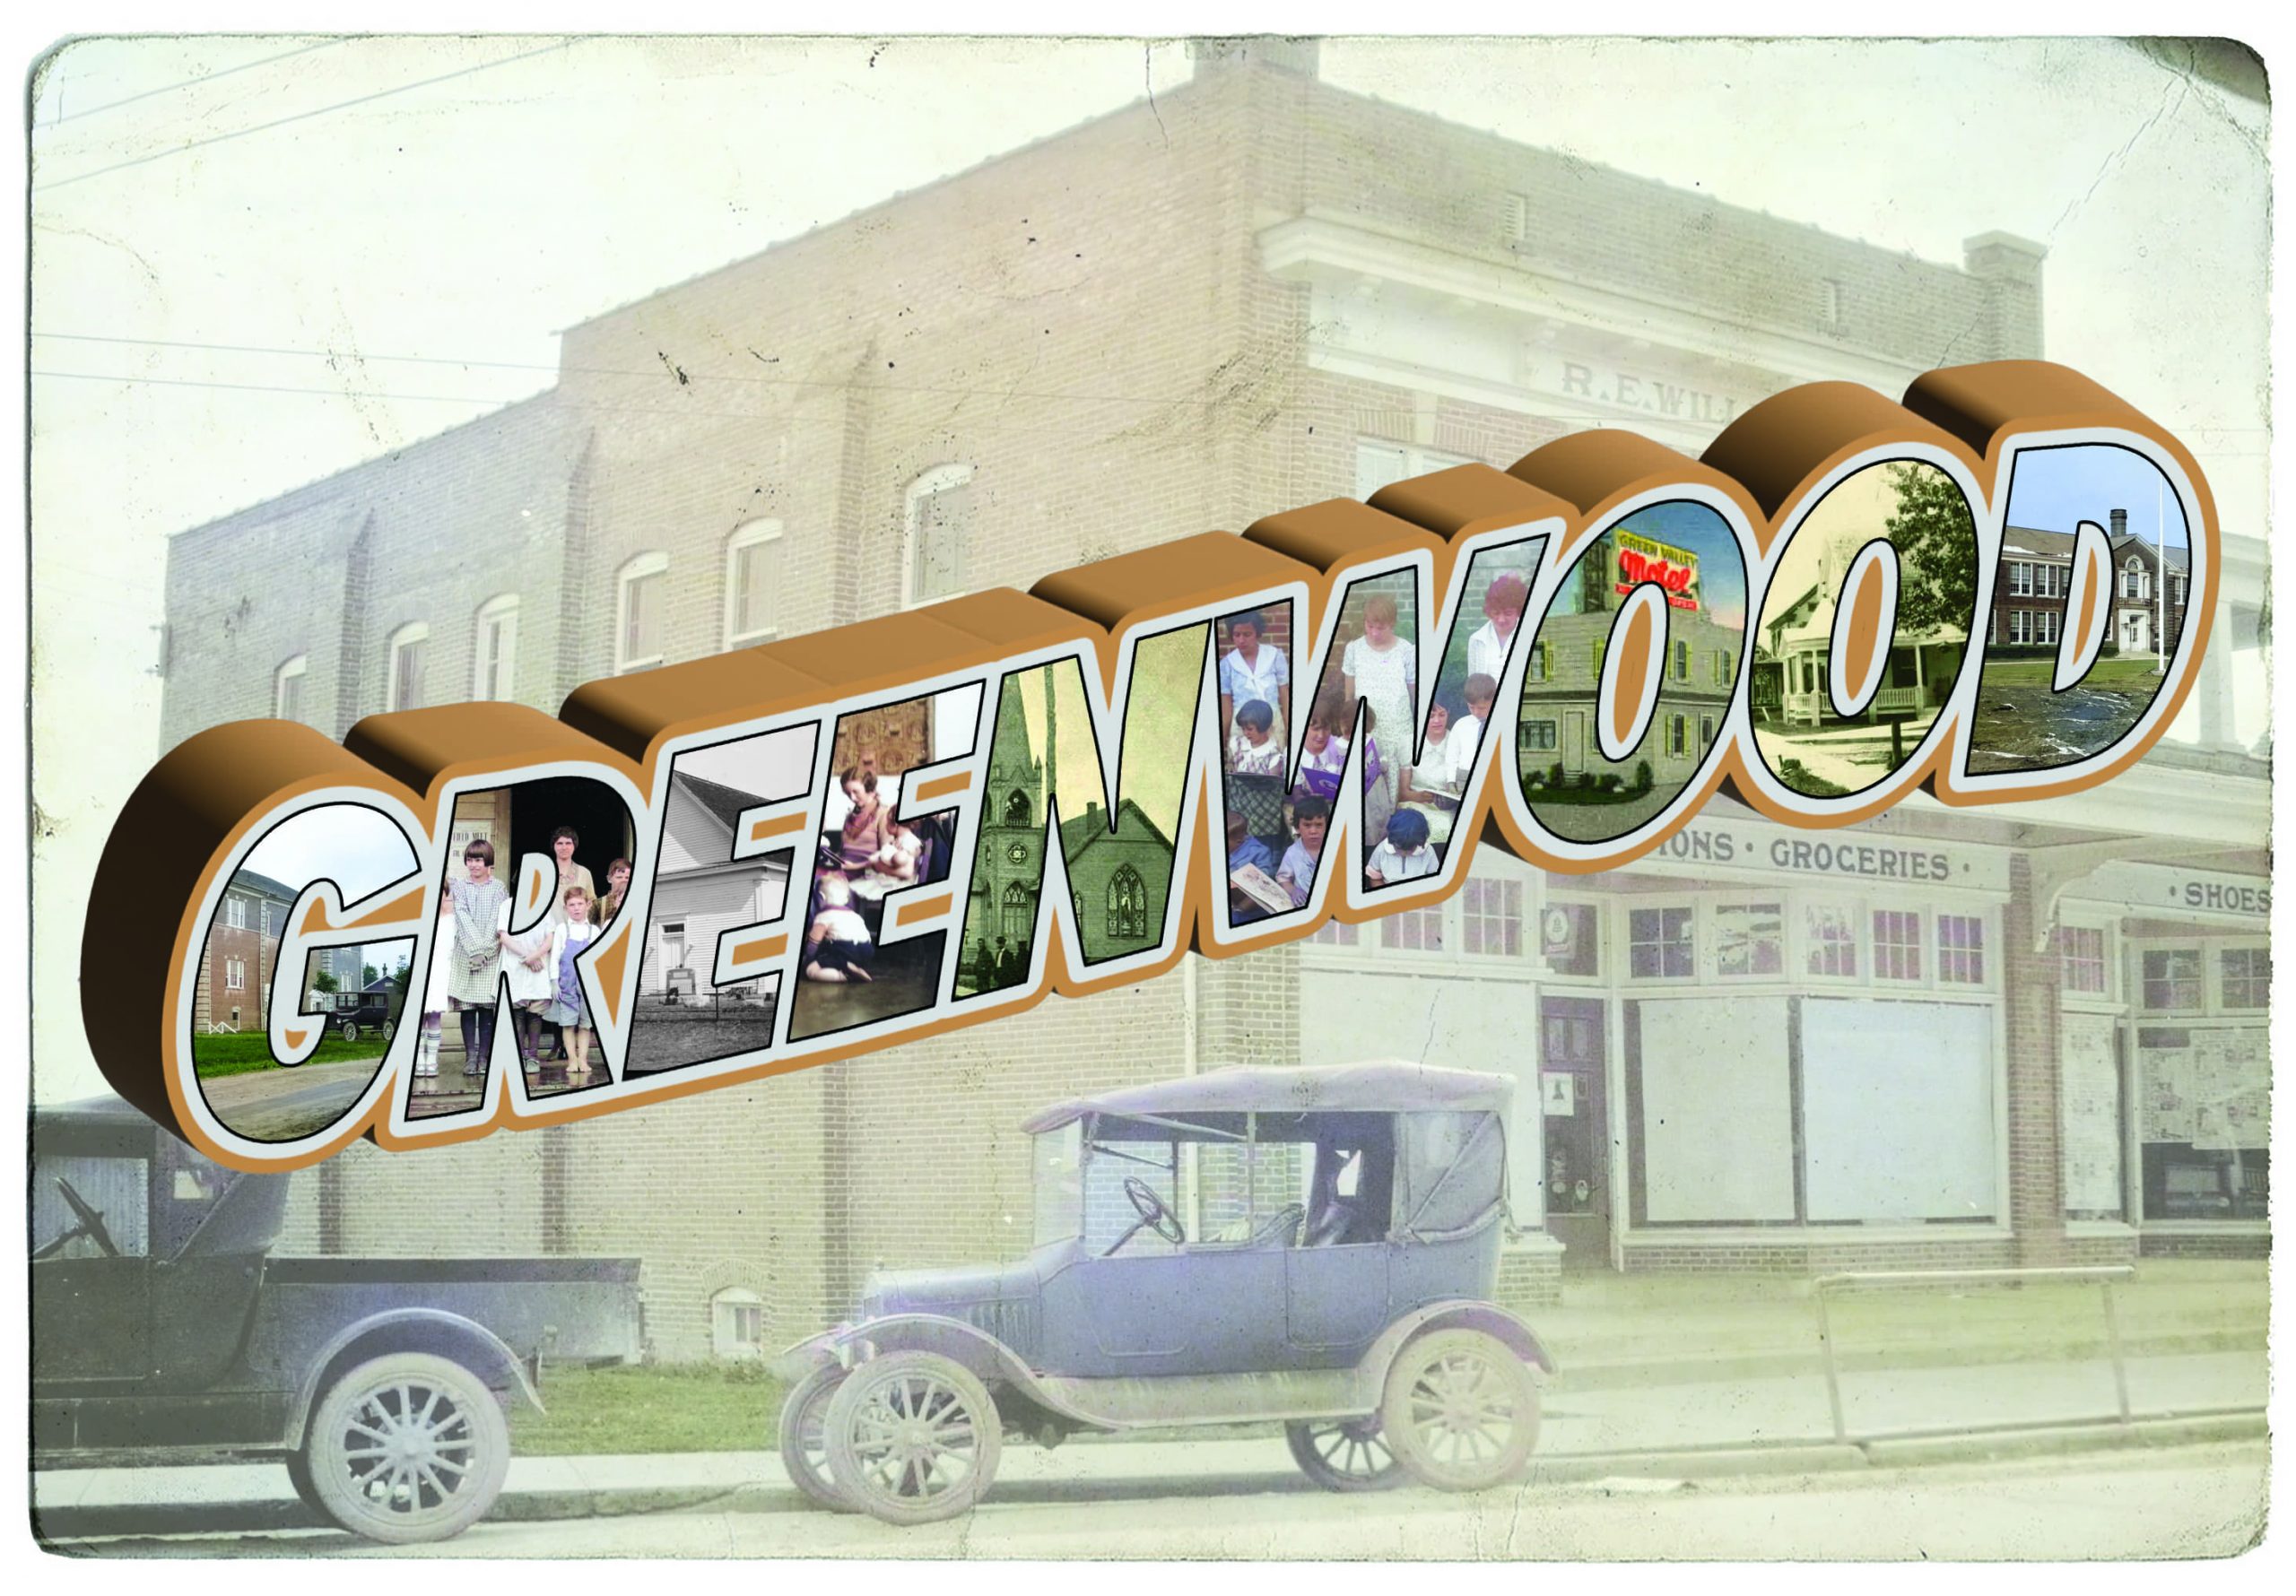 learn more about Greenwood